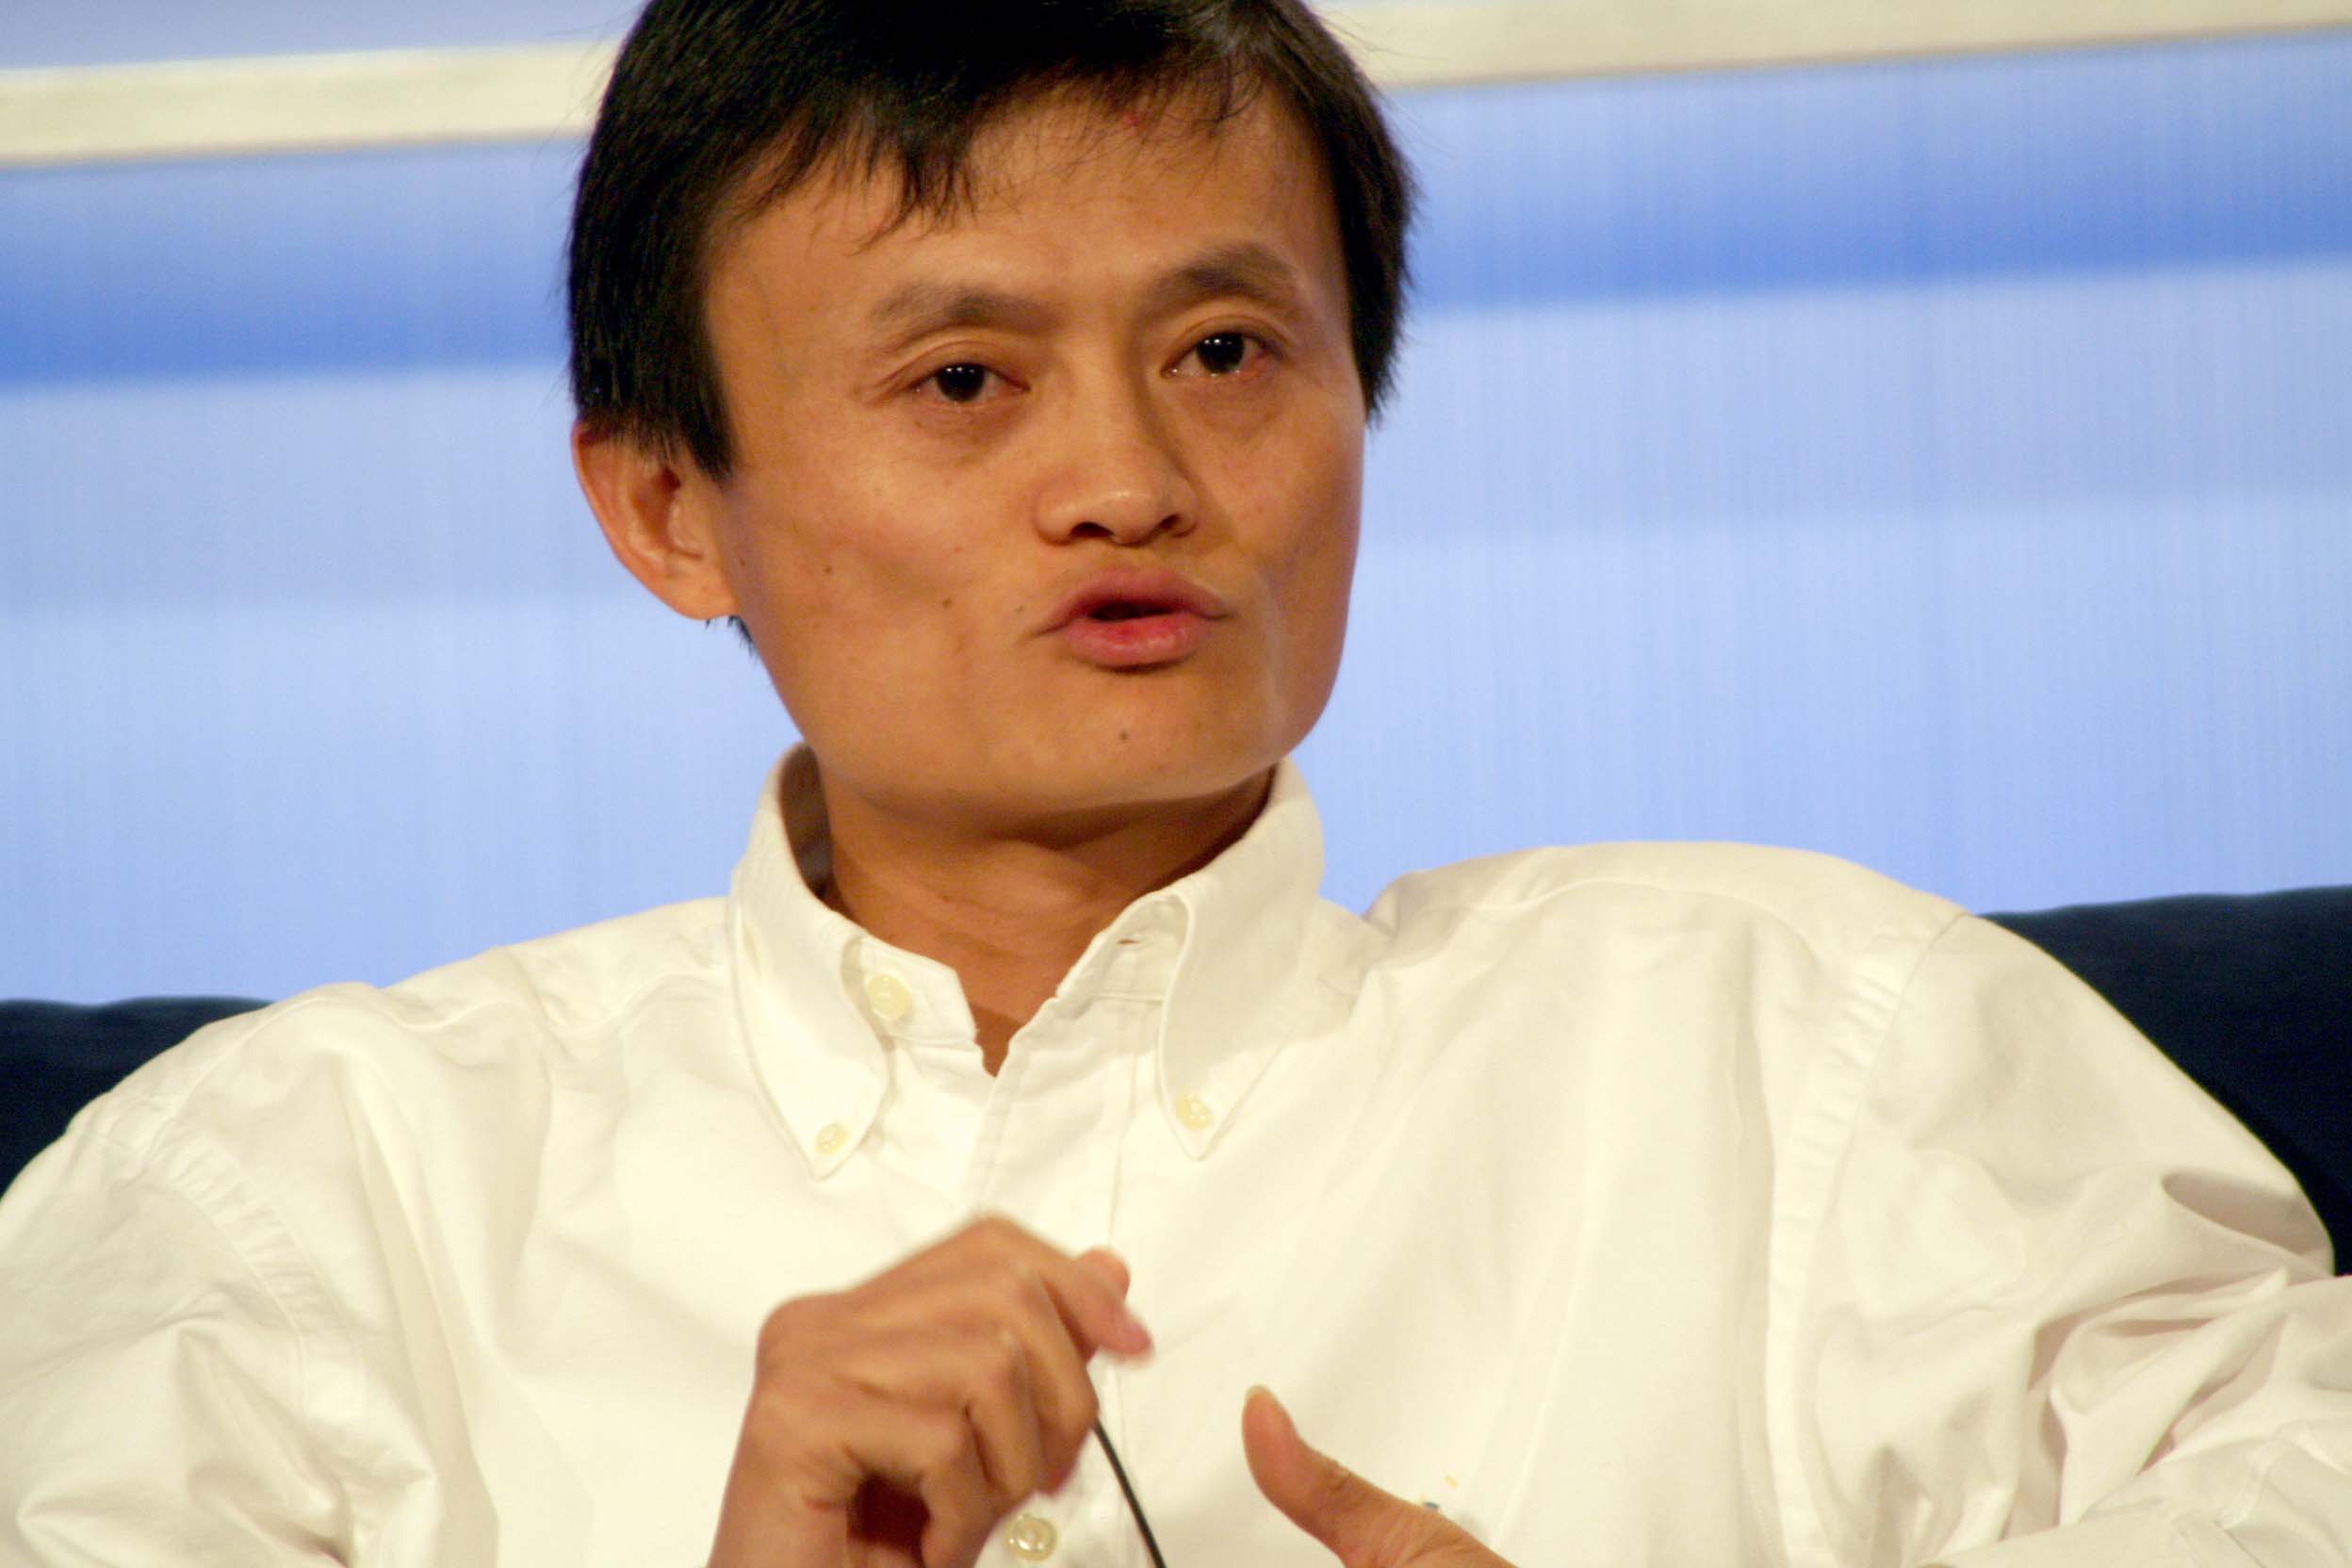 Jack Ma picture